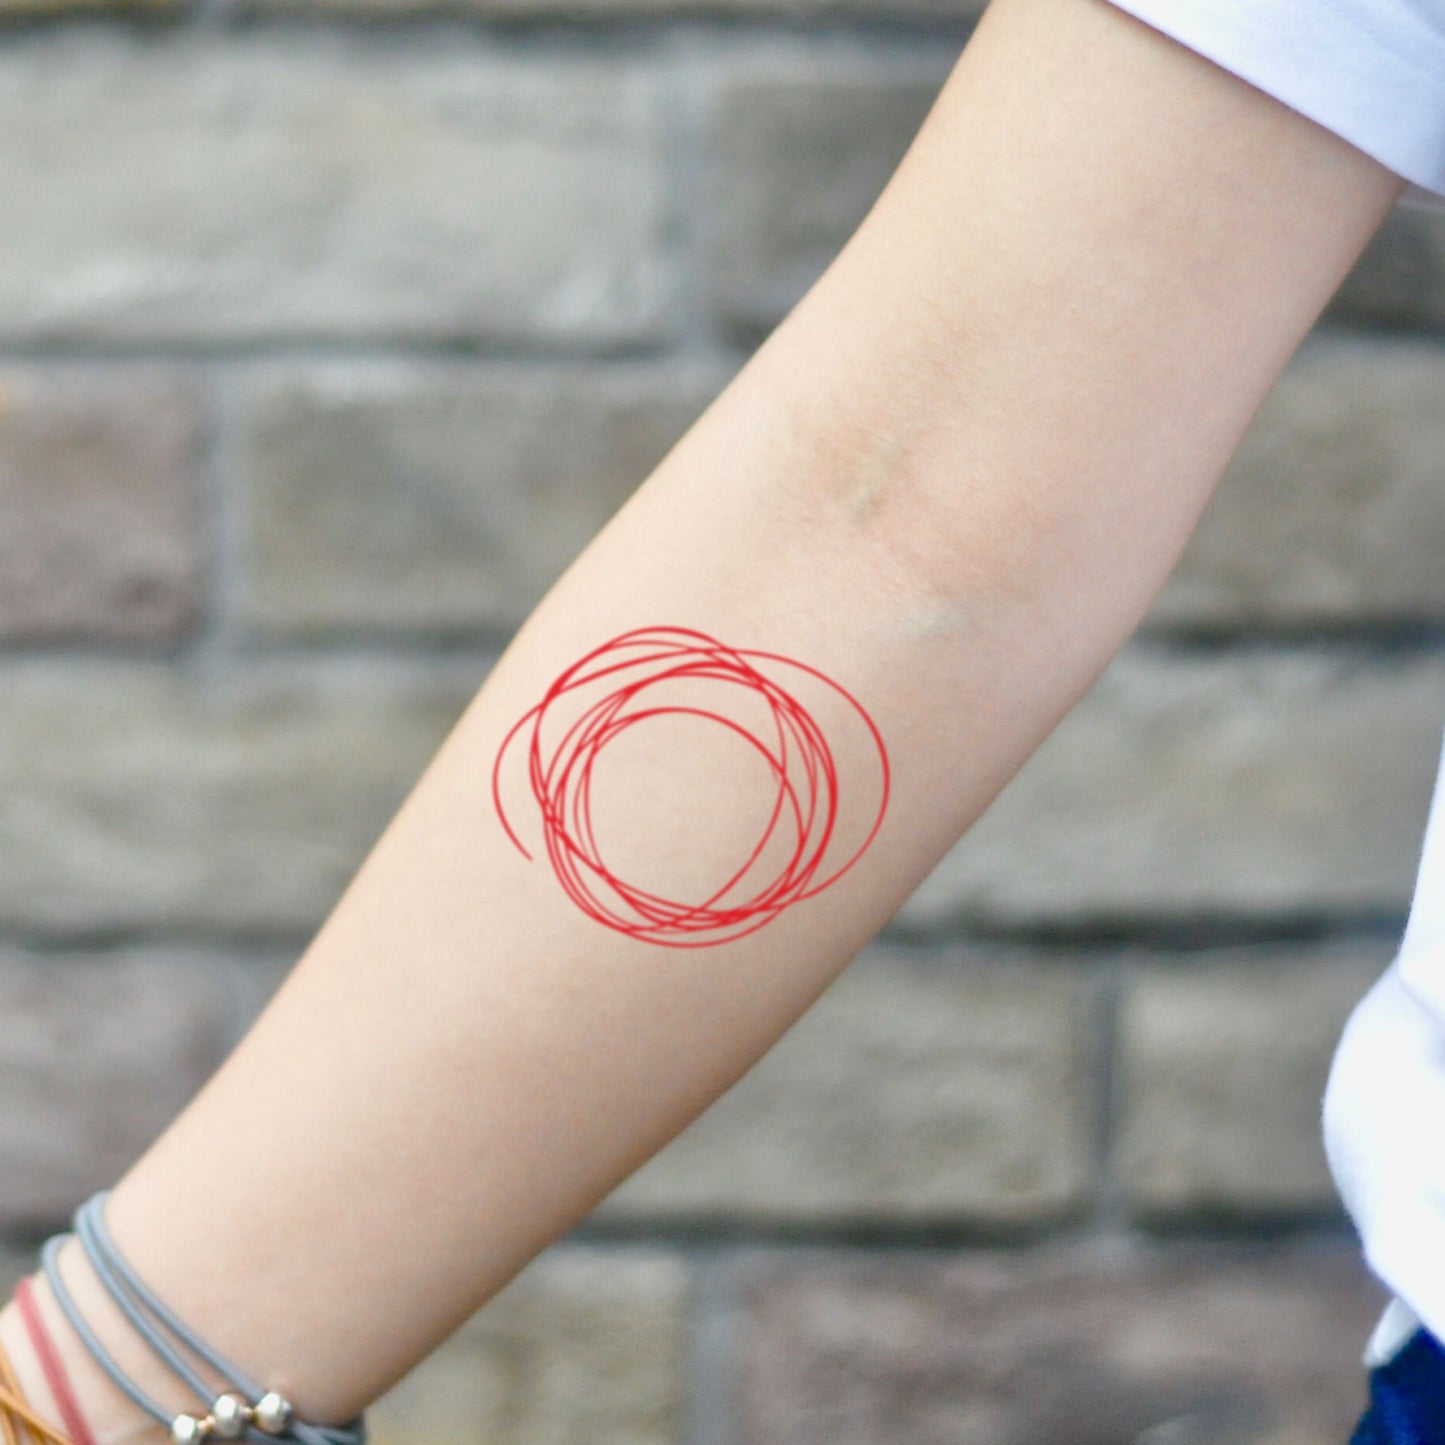 fake small scribble red line color temporary tattoo sticker design idea on inner arm